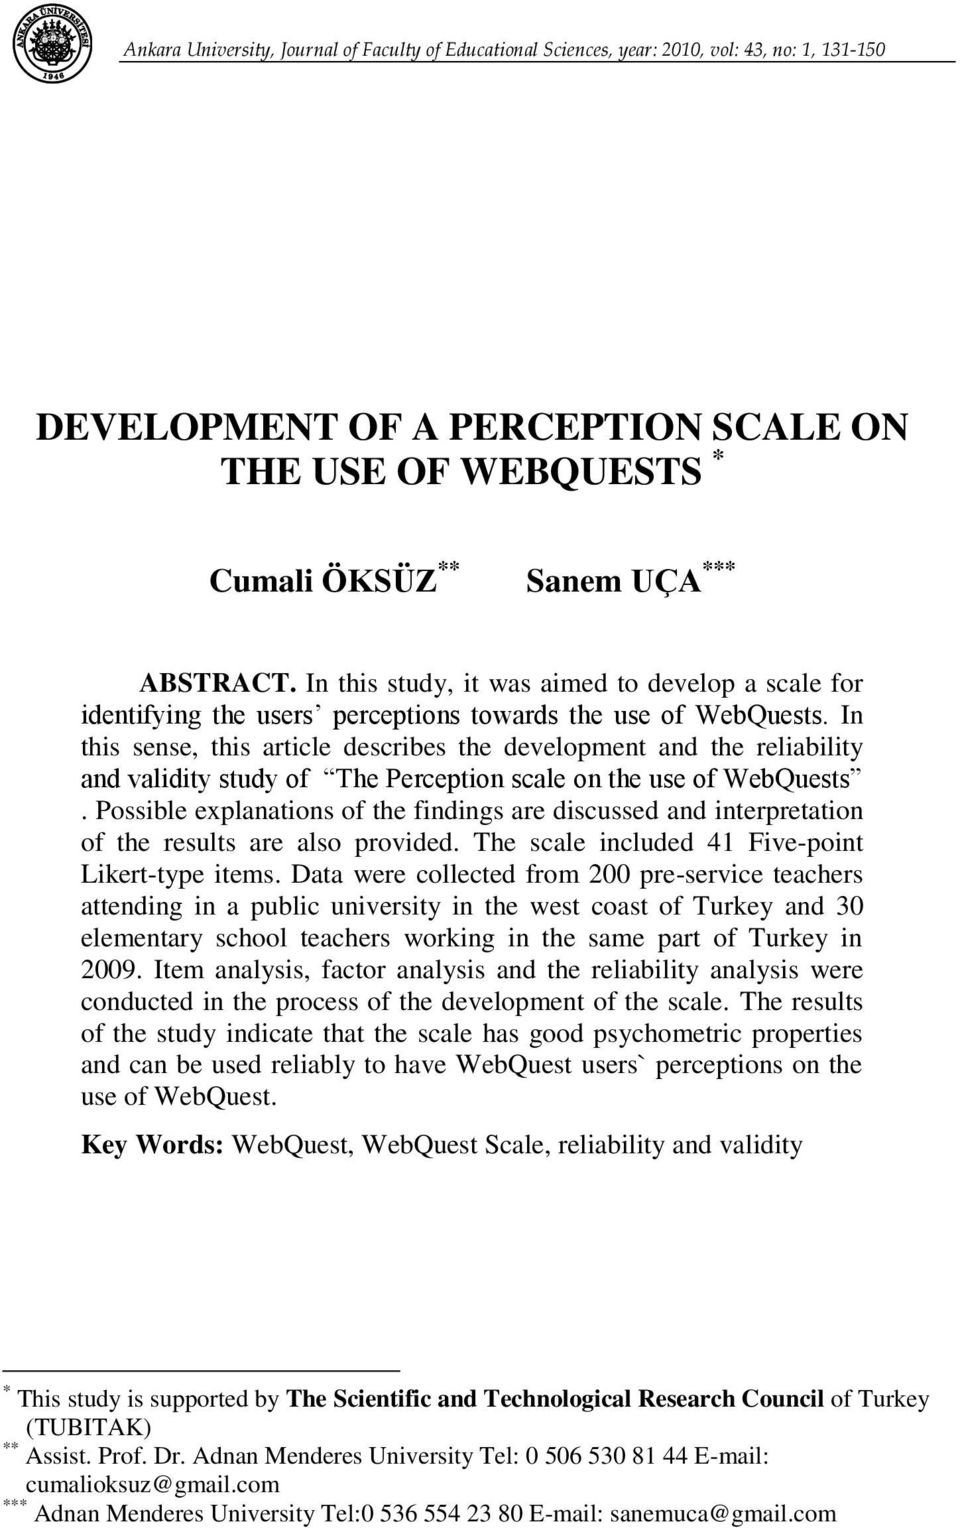 In this sense, this article describes the development and the reliability and validity study of The Perception scale on the use of WebQuests.